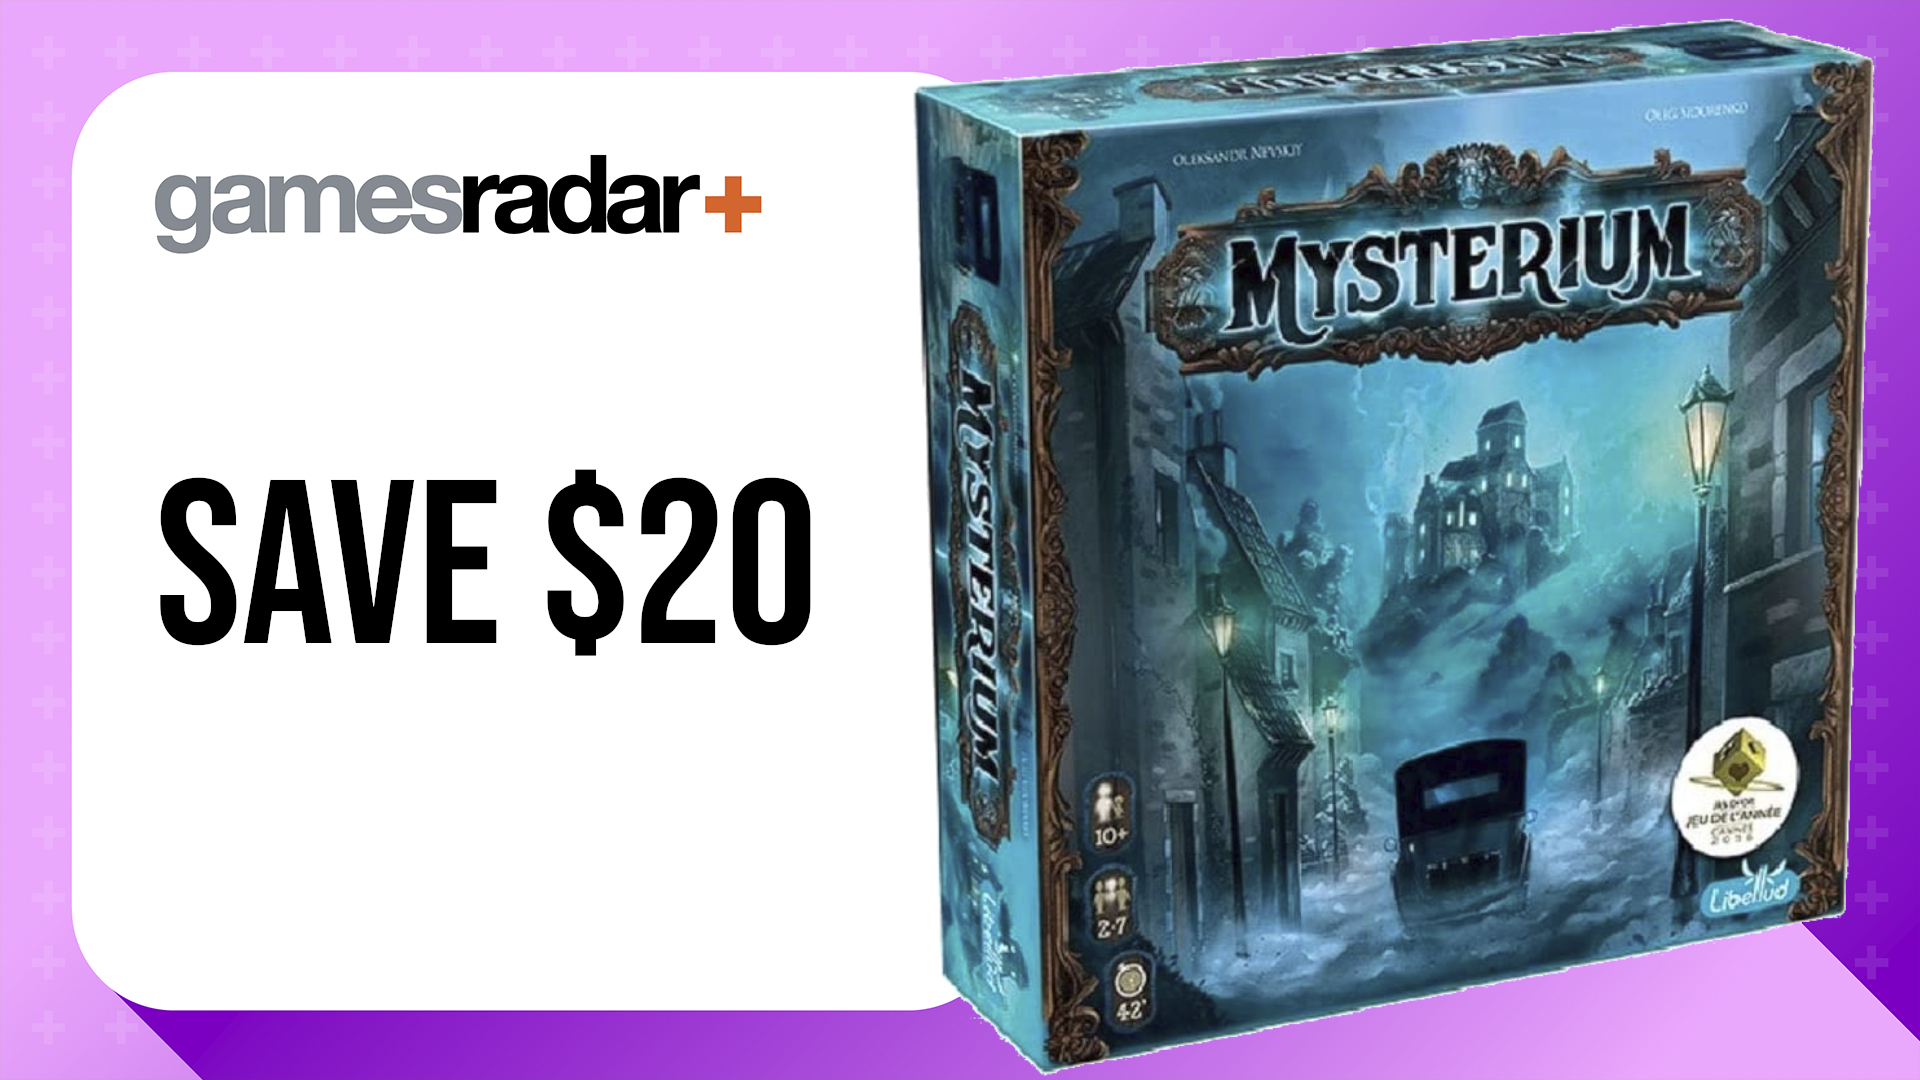 Black Friday board game deals with Mysterium